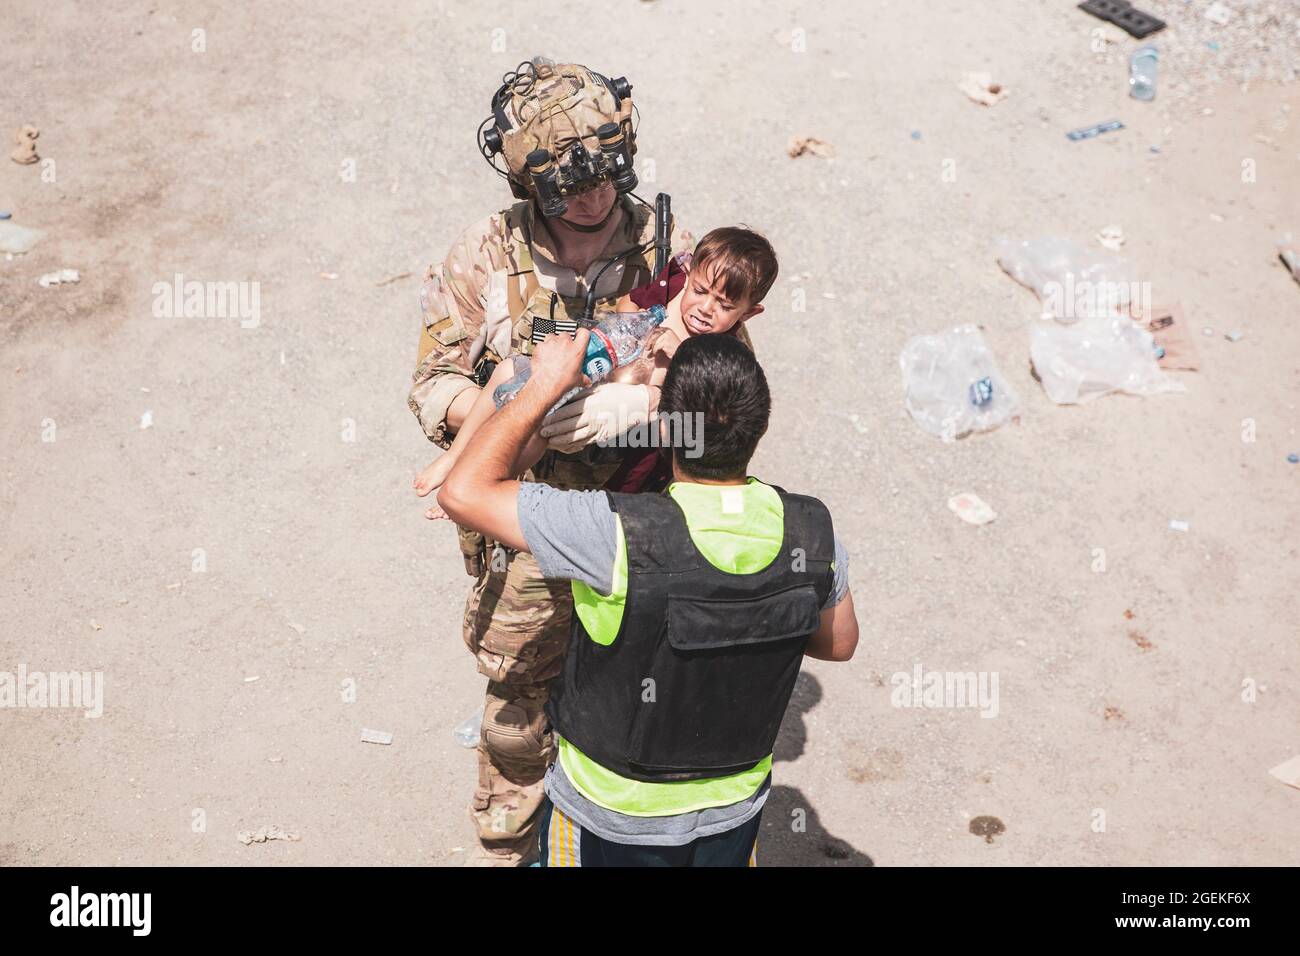 Kabul, Afghanistan. 20th Aug, 2021. A British soldier takes an unaccompanied child from an aid worker during the evacuation of non-combatants at Hamid Karzai International Airport, part of Operation Allies Refuge August 20, 2021 in Kabul, Afghanistan. Credit: Planetpix/Alamy Live News Stock Photo